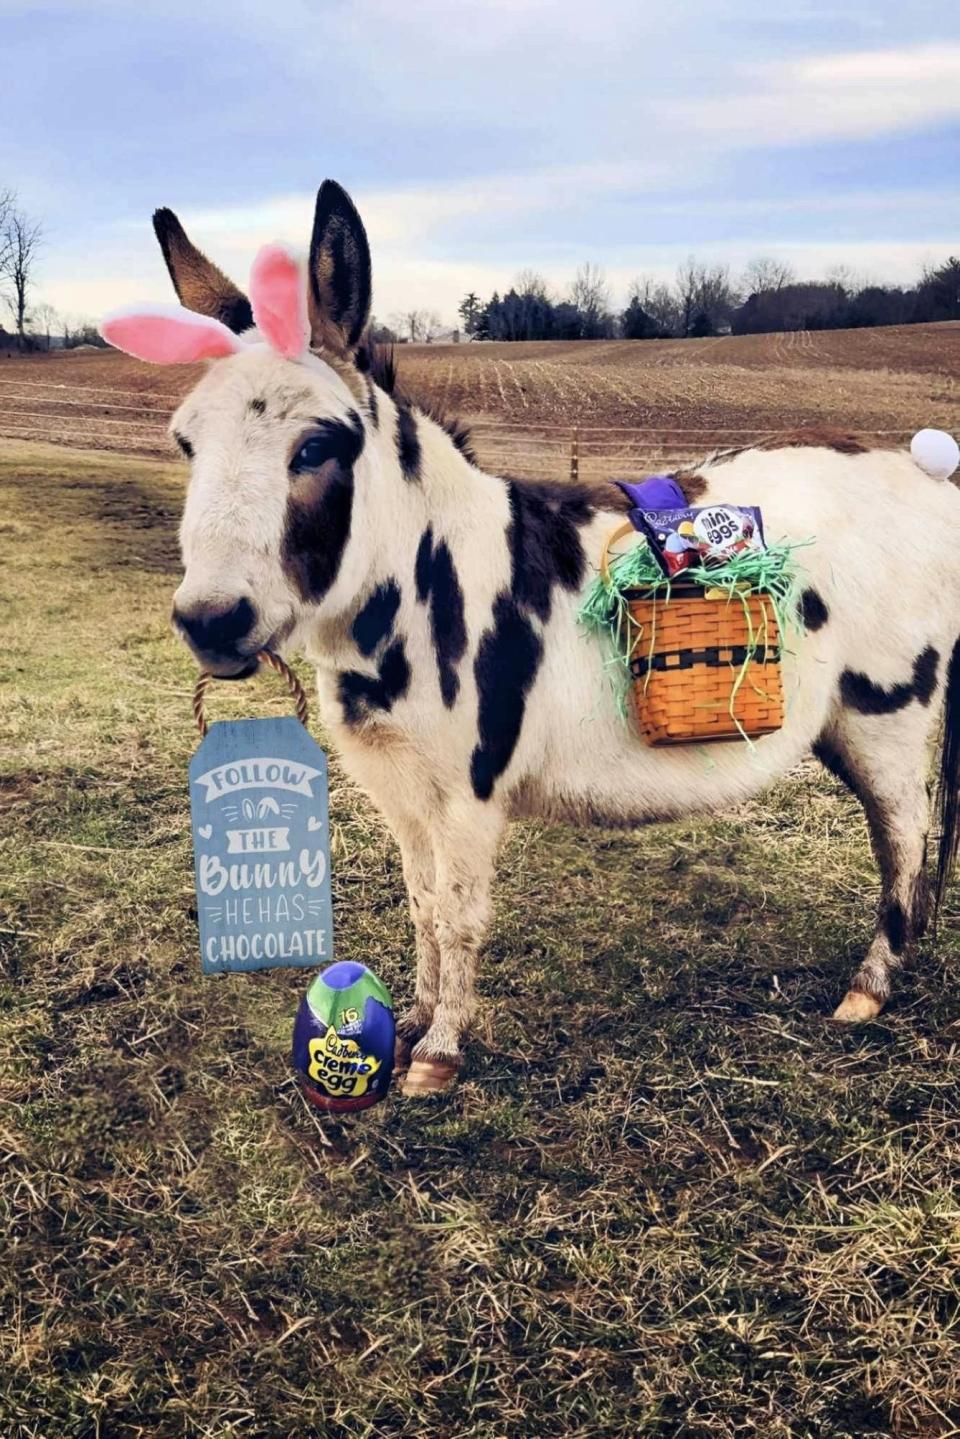 Sheldon, a miniature donkey owned by Lacy Geisler of Dover, is among the finalists to star in a Cadbury candy commercial. Geisler's cat, Violet, is also in the running.